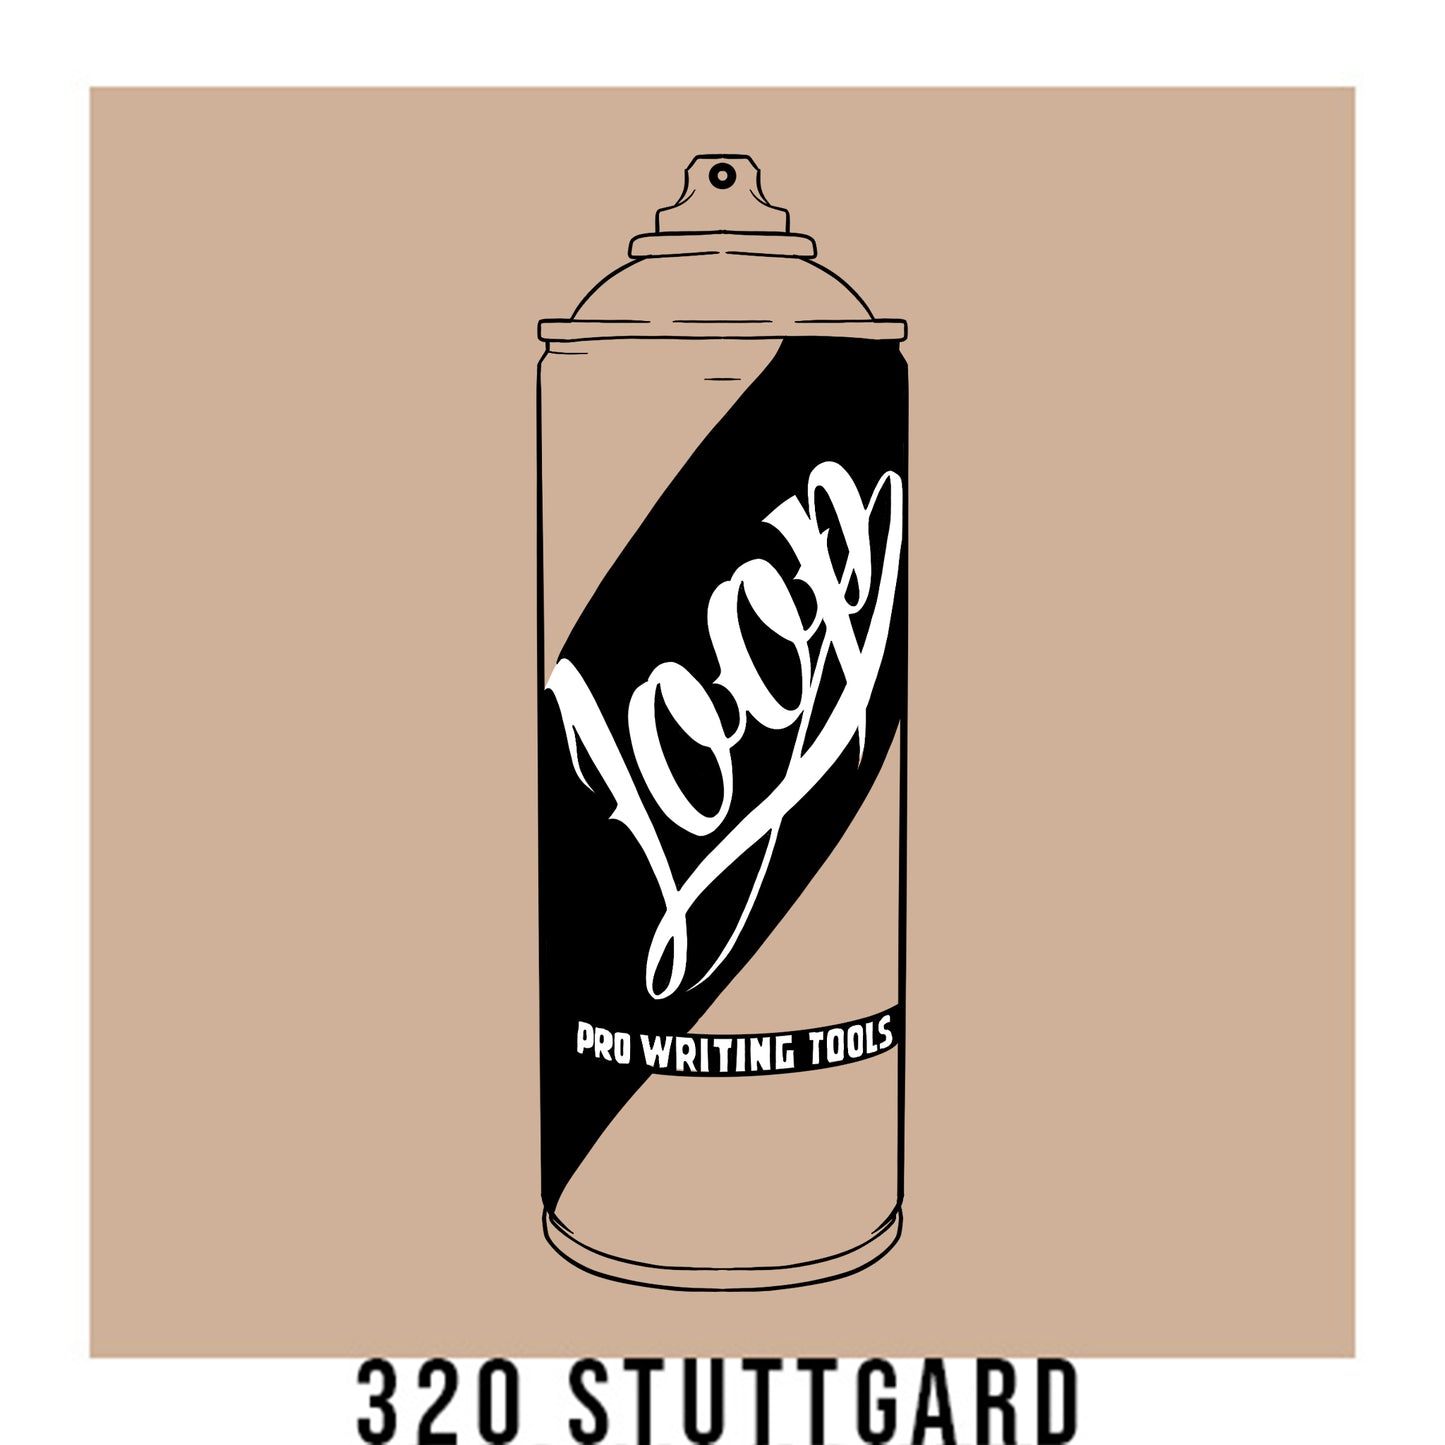 A black outline drawing of a tan spray paint can with the word "Loop" written on the face in script. The background is a color swatch of the same tan with a white border with the words "320 Stuttgard" at the bottom.